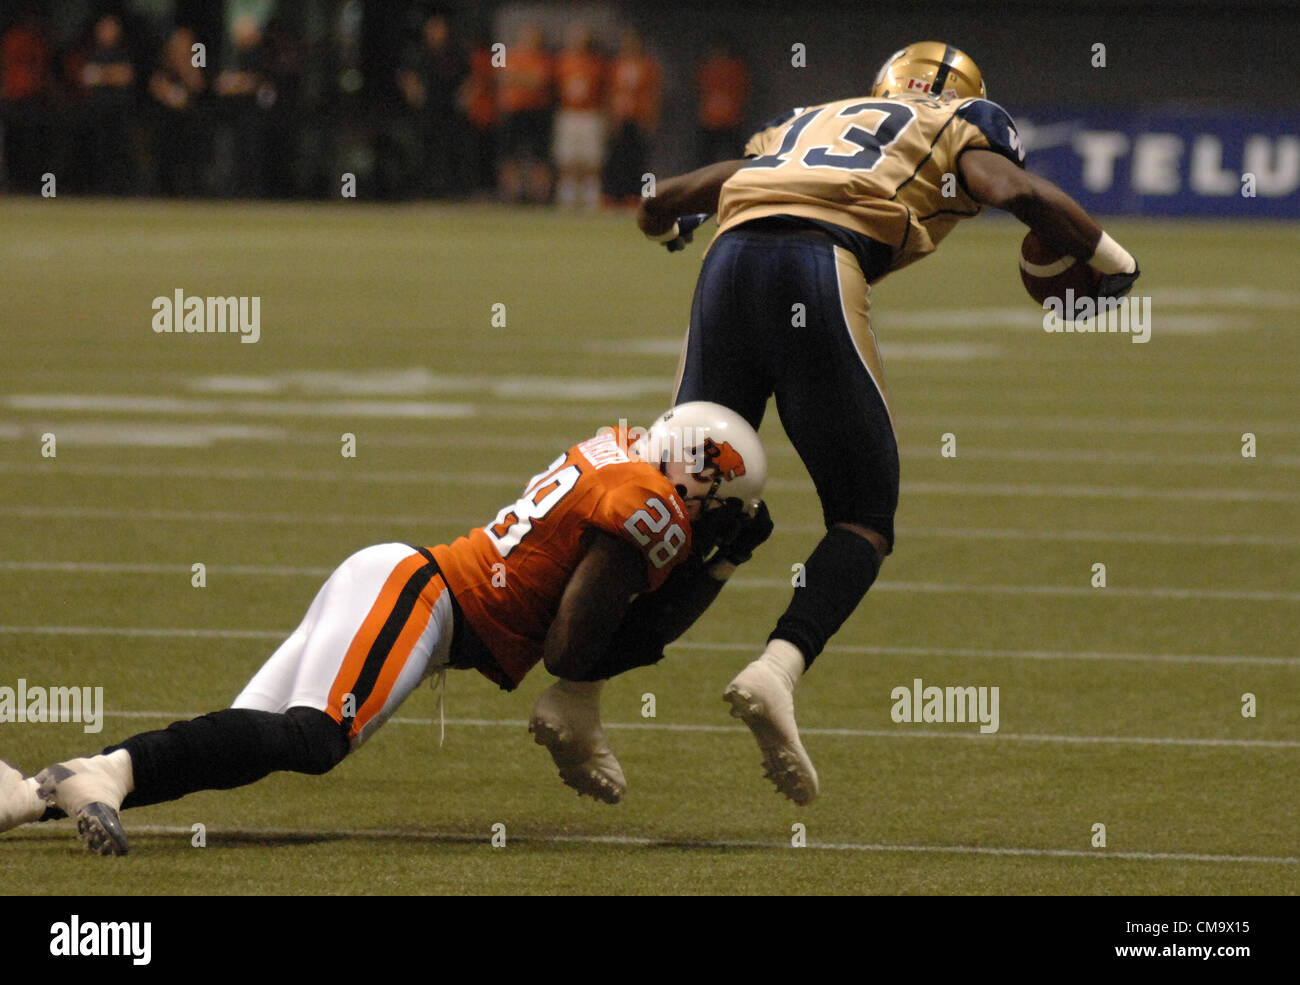 B.C. Lions’  Anthony Reddick (L) vies with Winnipeg Blue Bombers’ Chris Matthews during a CFL season opening football game in Vancouver, B.C., on June 29, 2012. Lions defeated Blue Bombers 44-10. Tonight BC Lions Geroy Simon made a history by breaking the CFL all-time receiving yards record in game against Winnipeg Blue Bombers. Stock Photo